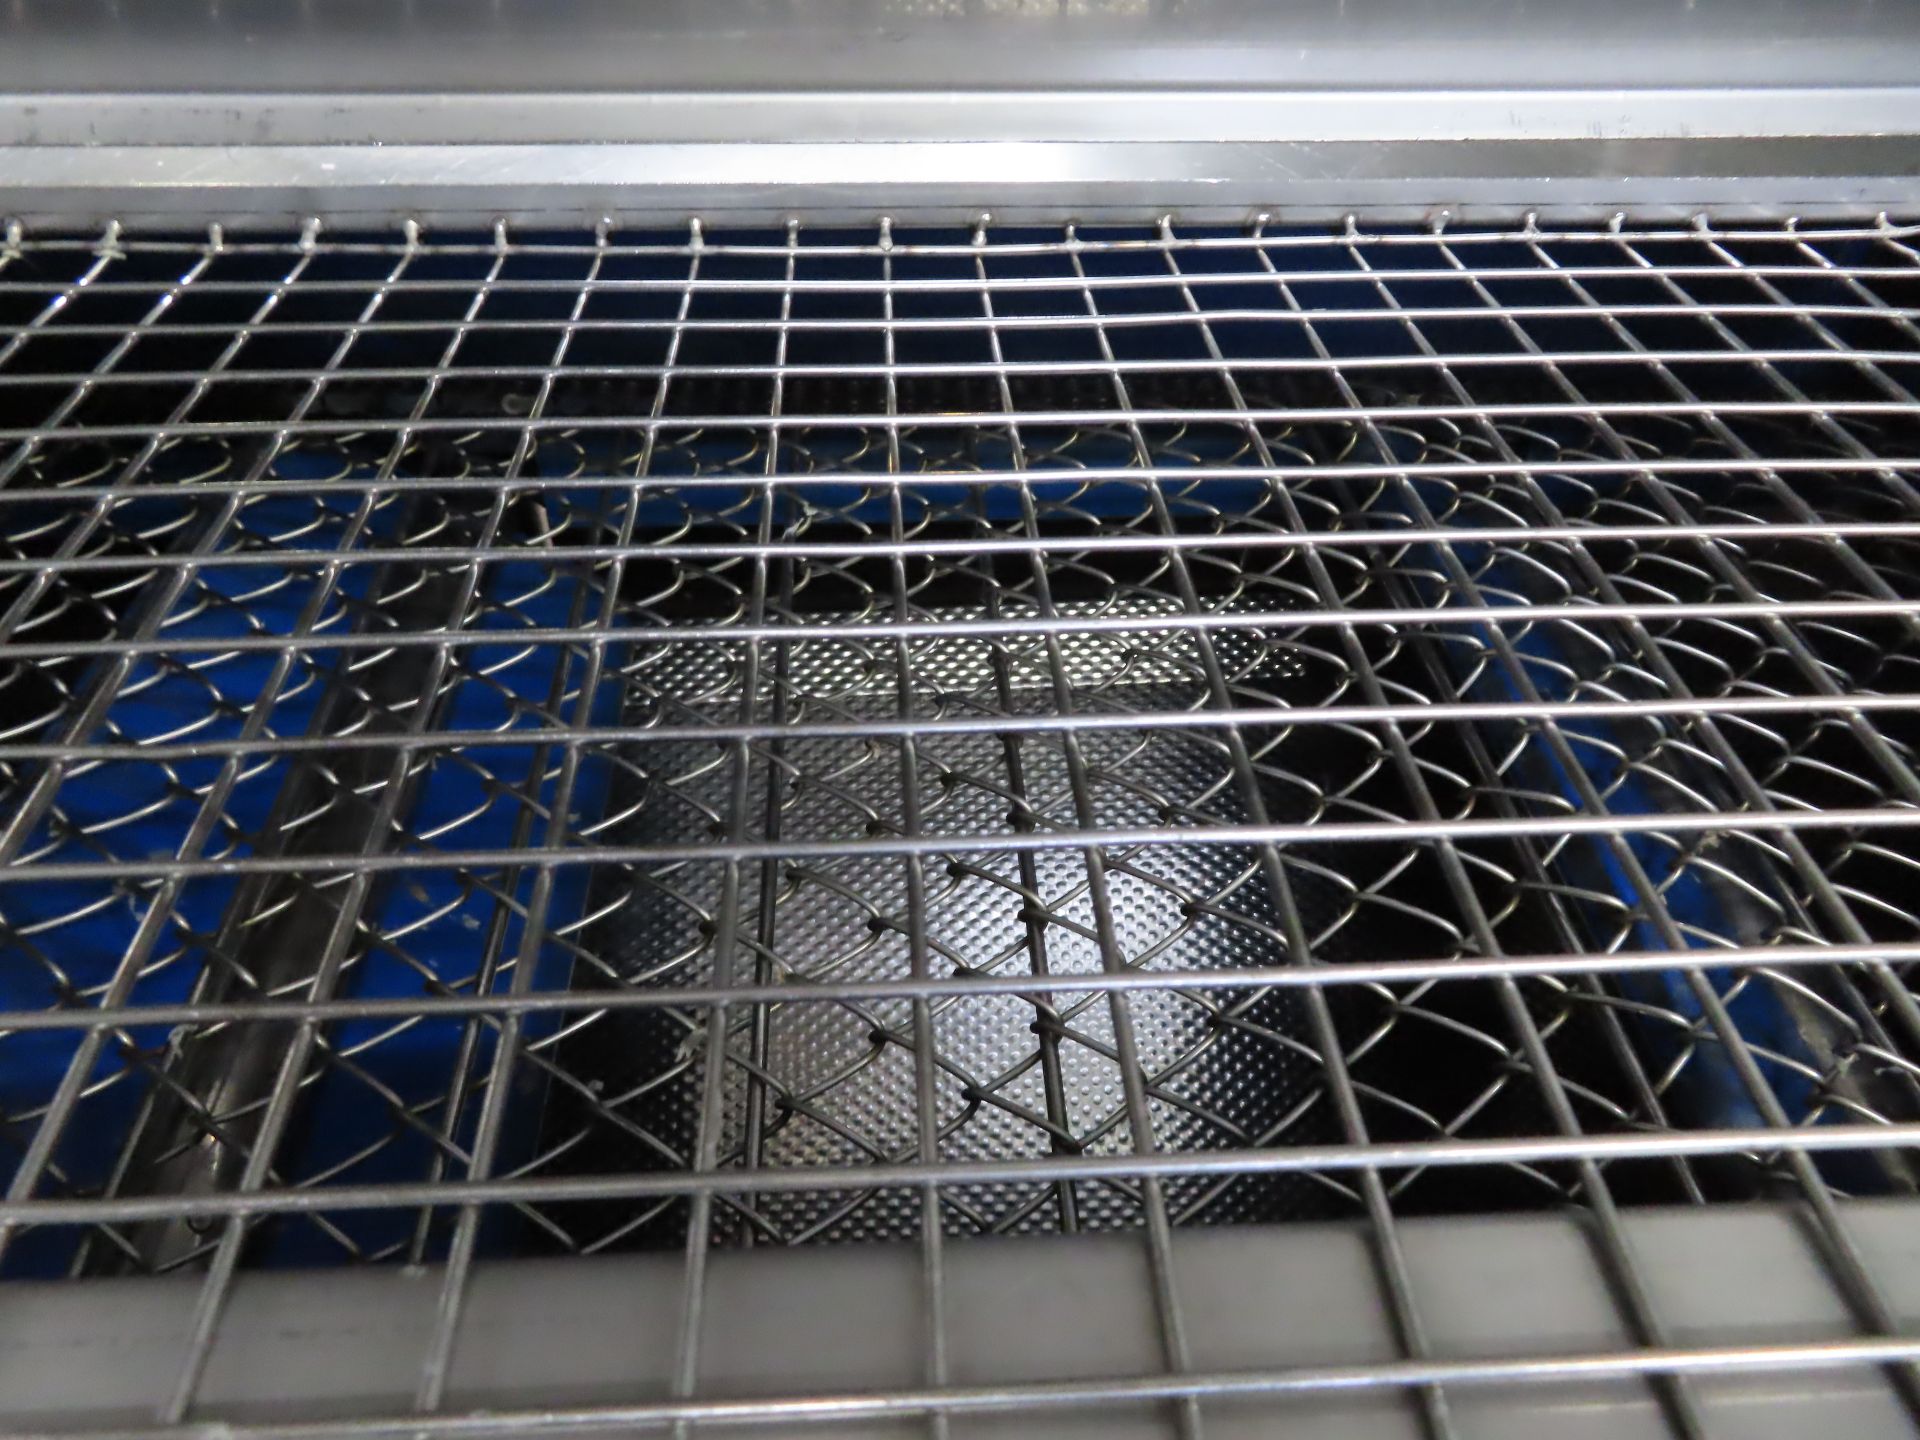 SIEVE SYSTEM. - Image 2 of 5